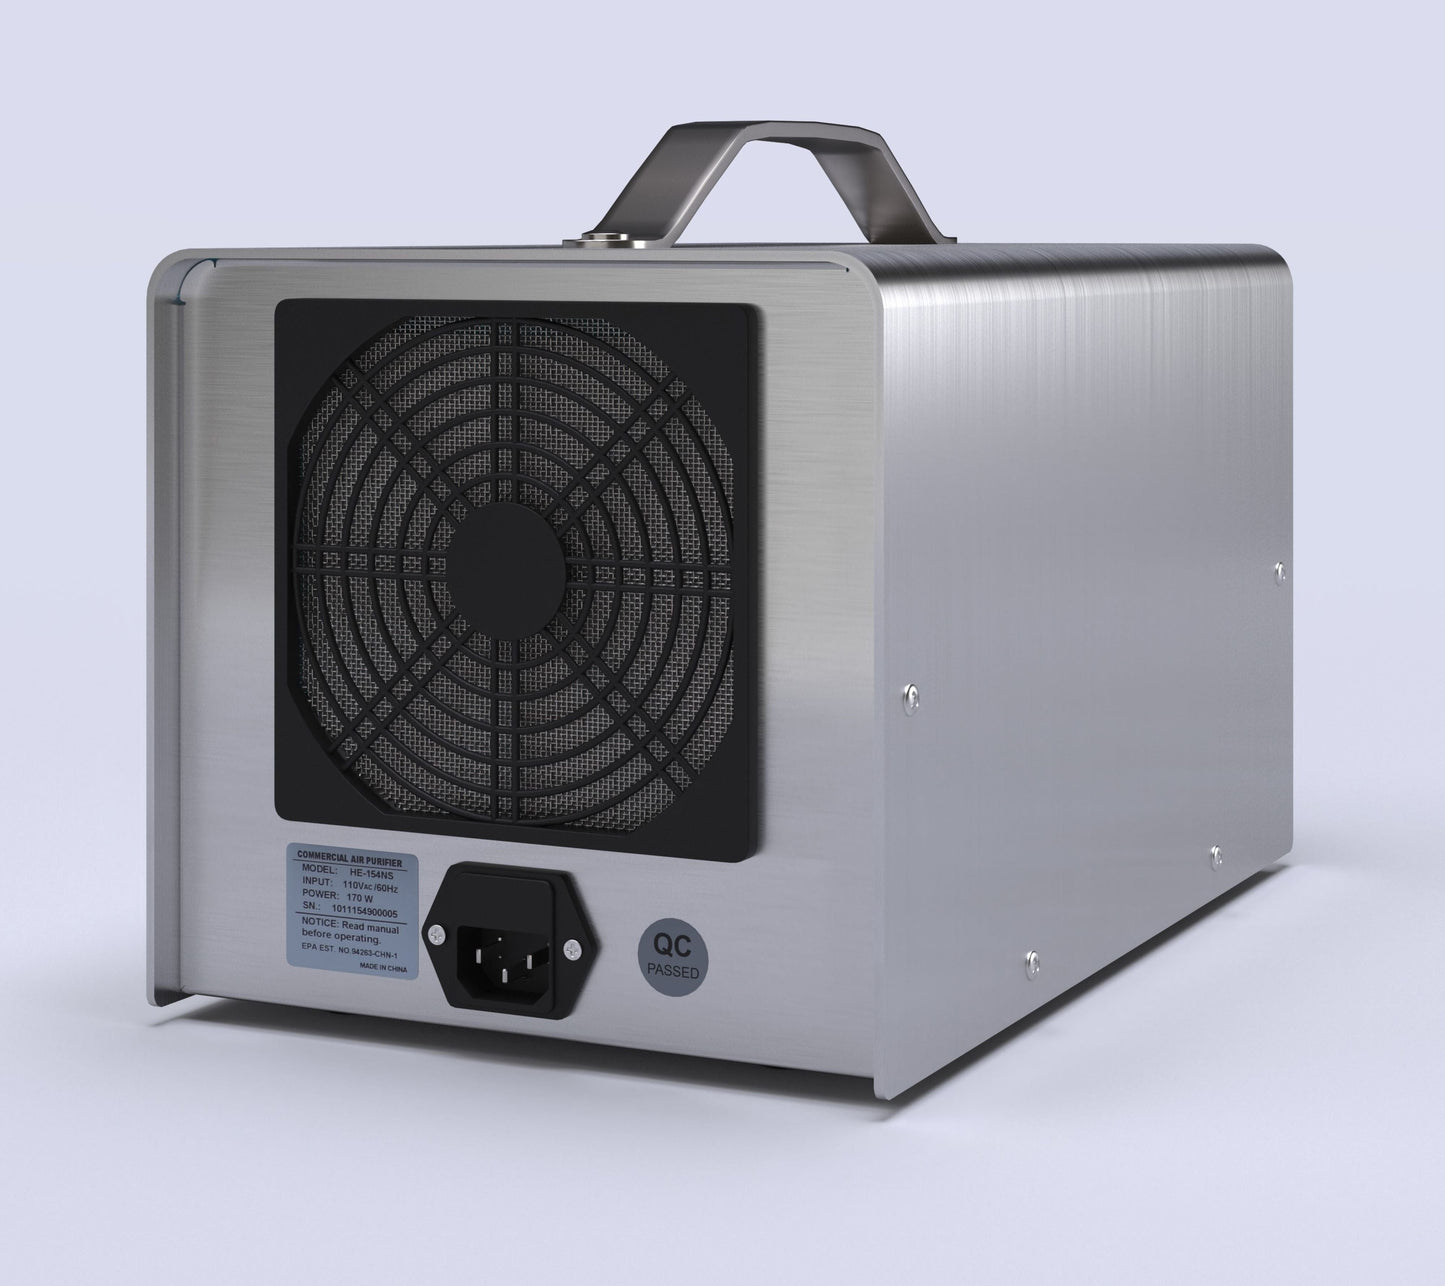 DEMO New Comfort Stainless Steel 9,000 to 14,000 mg/hr Commercial Ozone Generator and Air Purifier